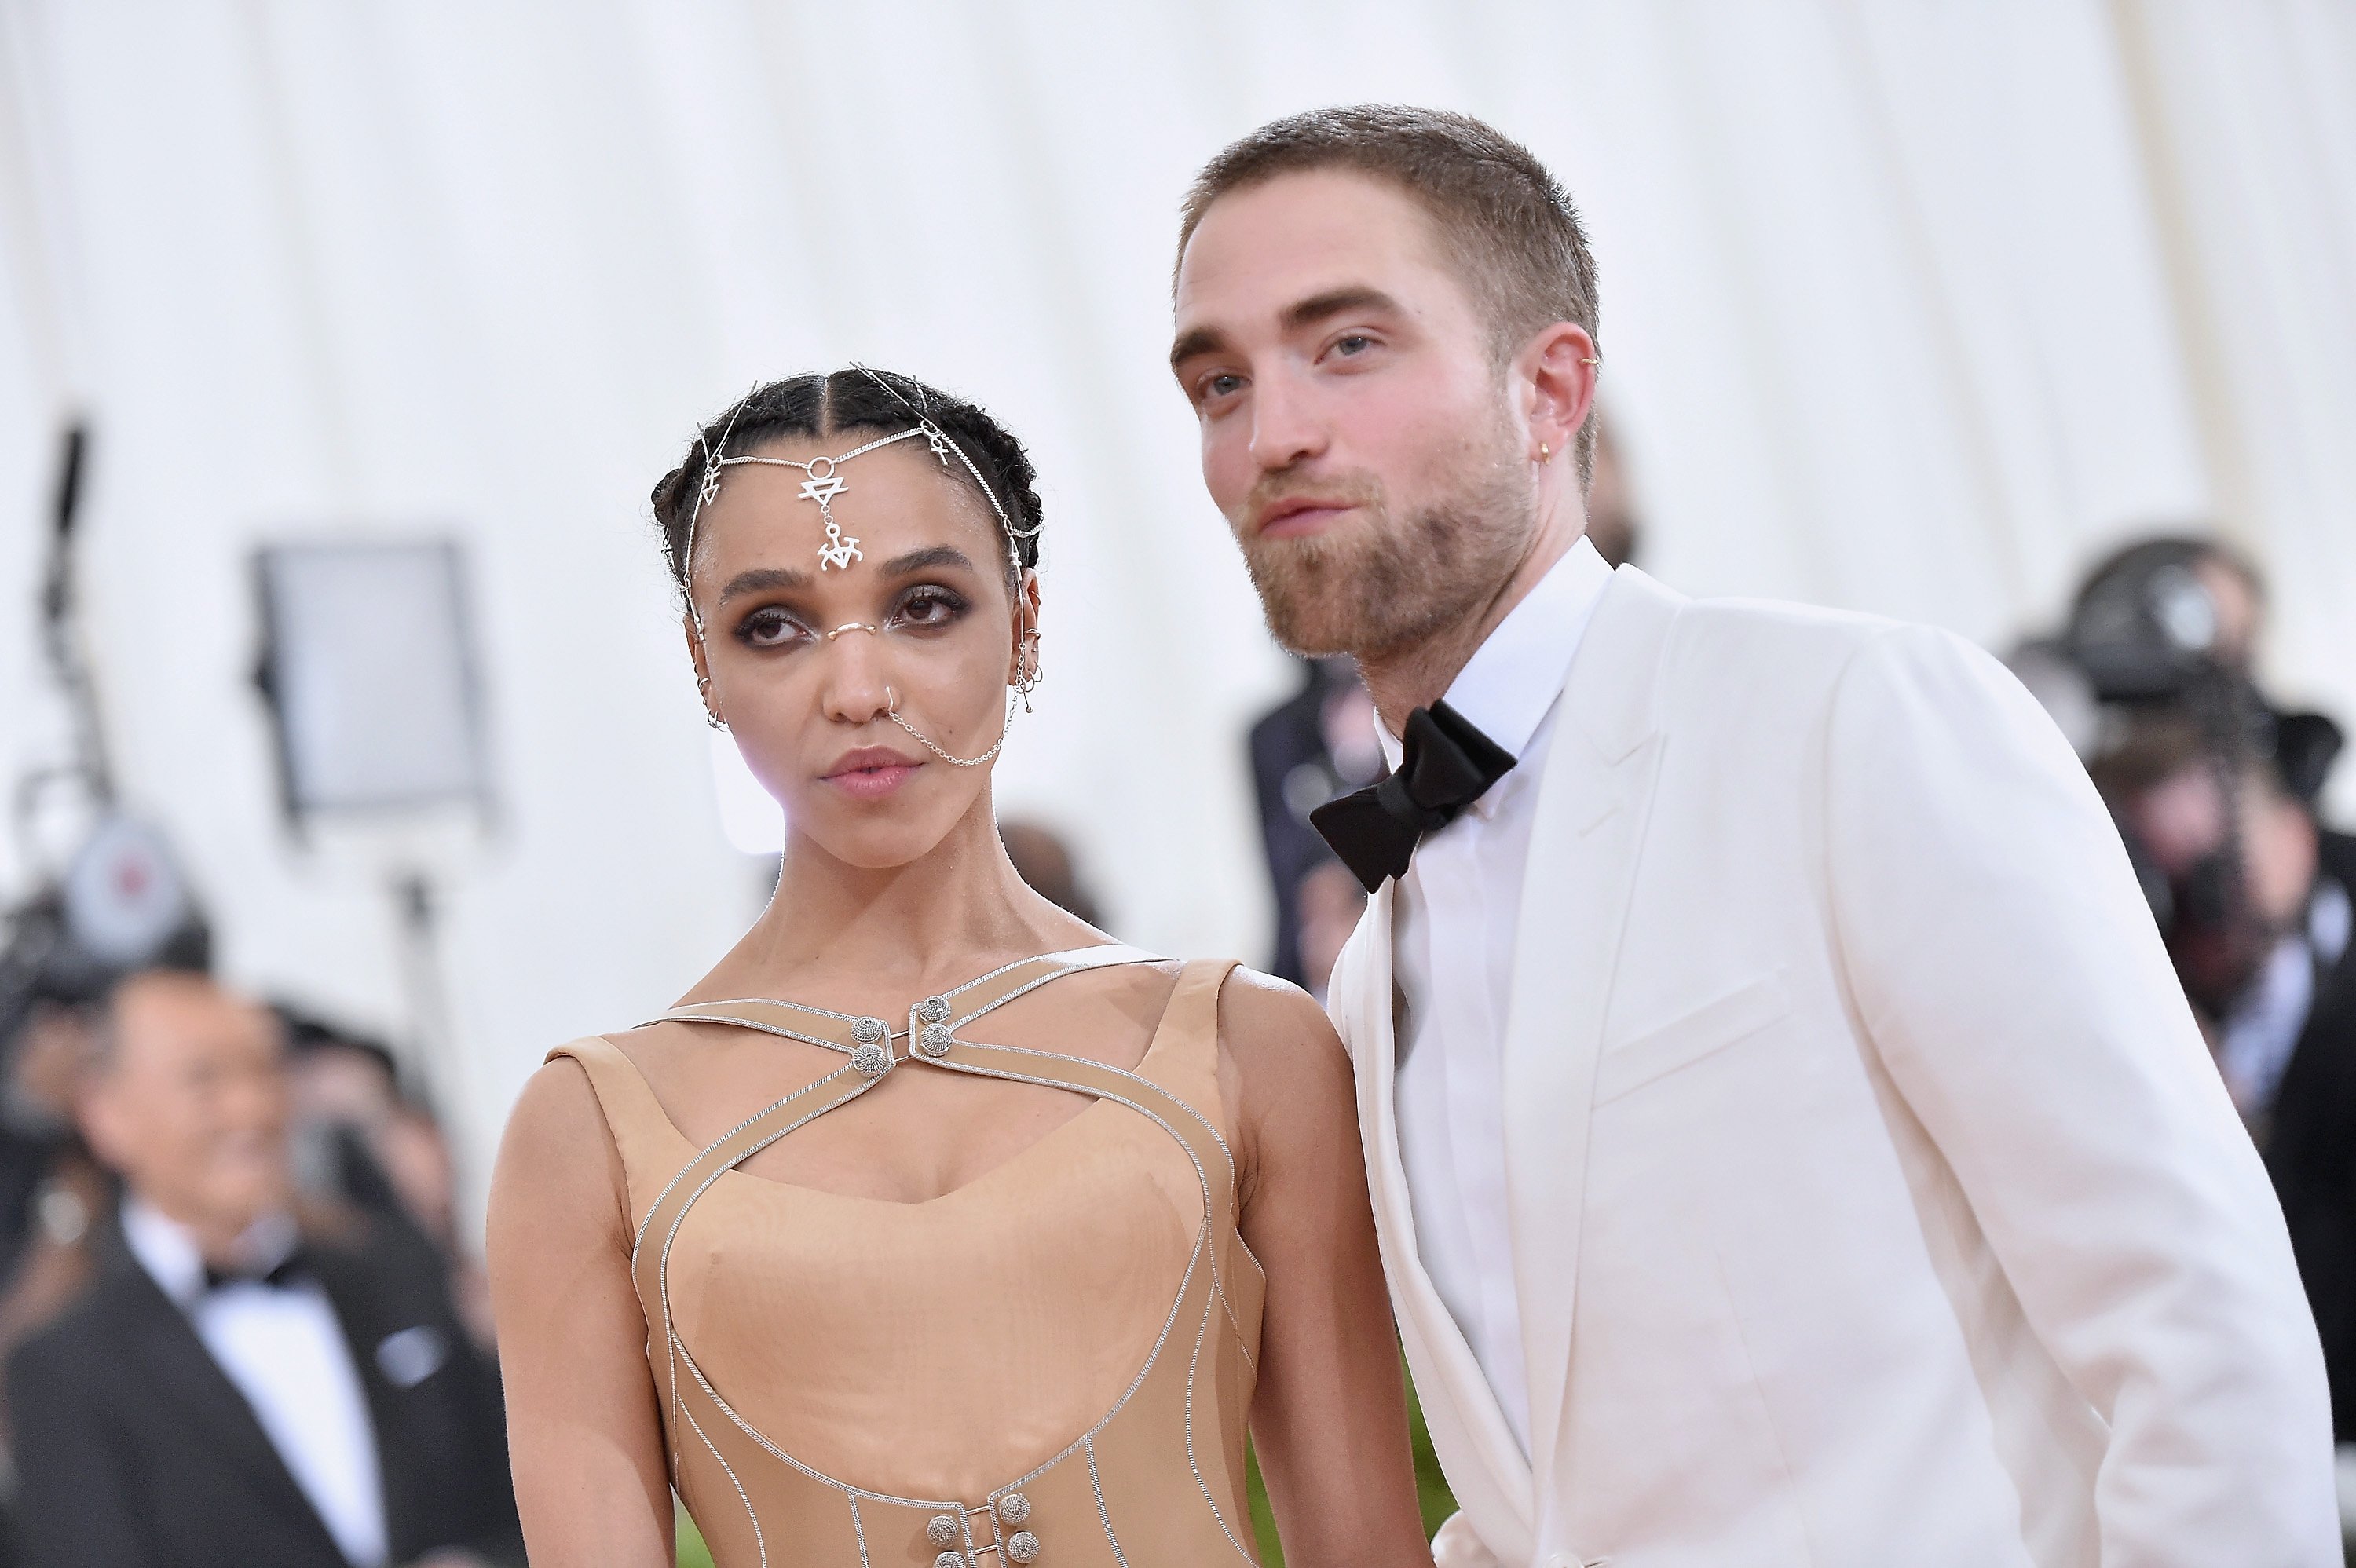 FKA Twigs and Robert Pattinson at the Costume Institute Gala at Metropolitan Museum of Art on May 2, 2016 in New York City.|Source: Getty Images